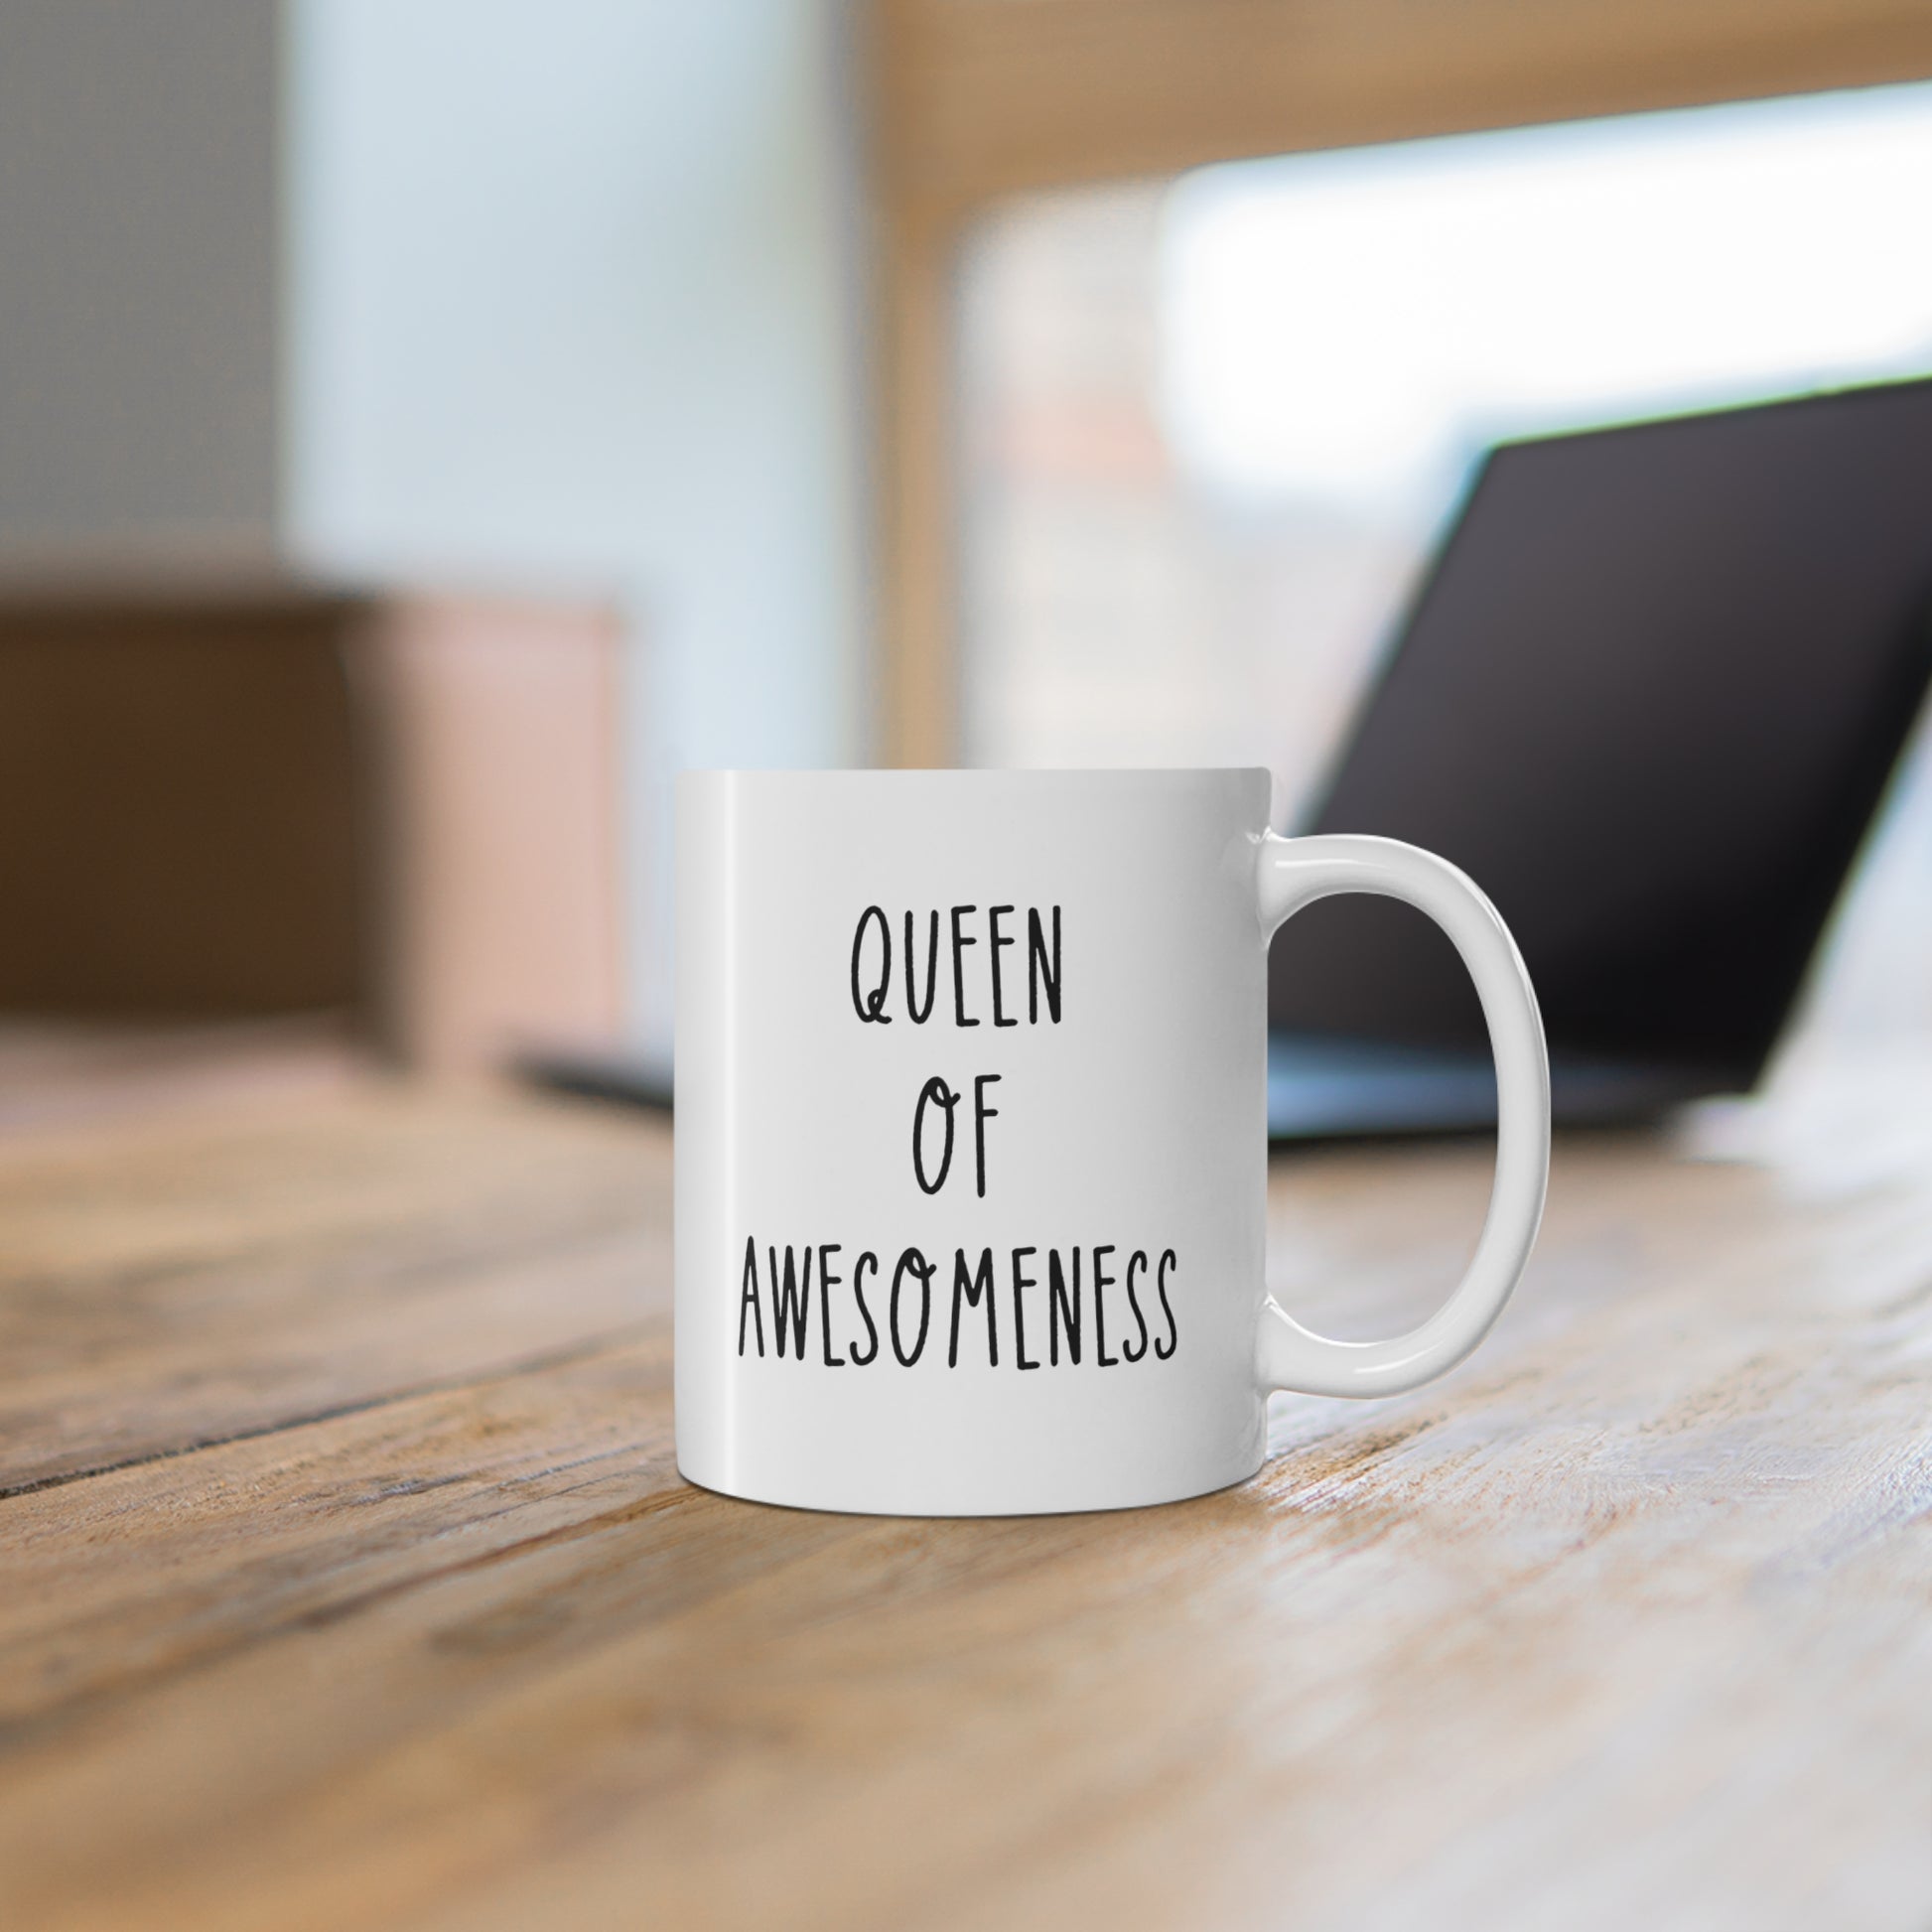 11oz ceramic mug with quote Queen of Awesomeness